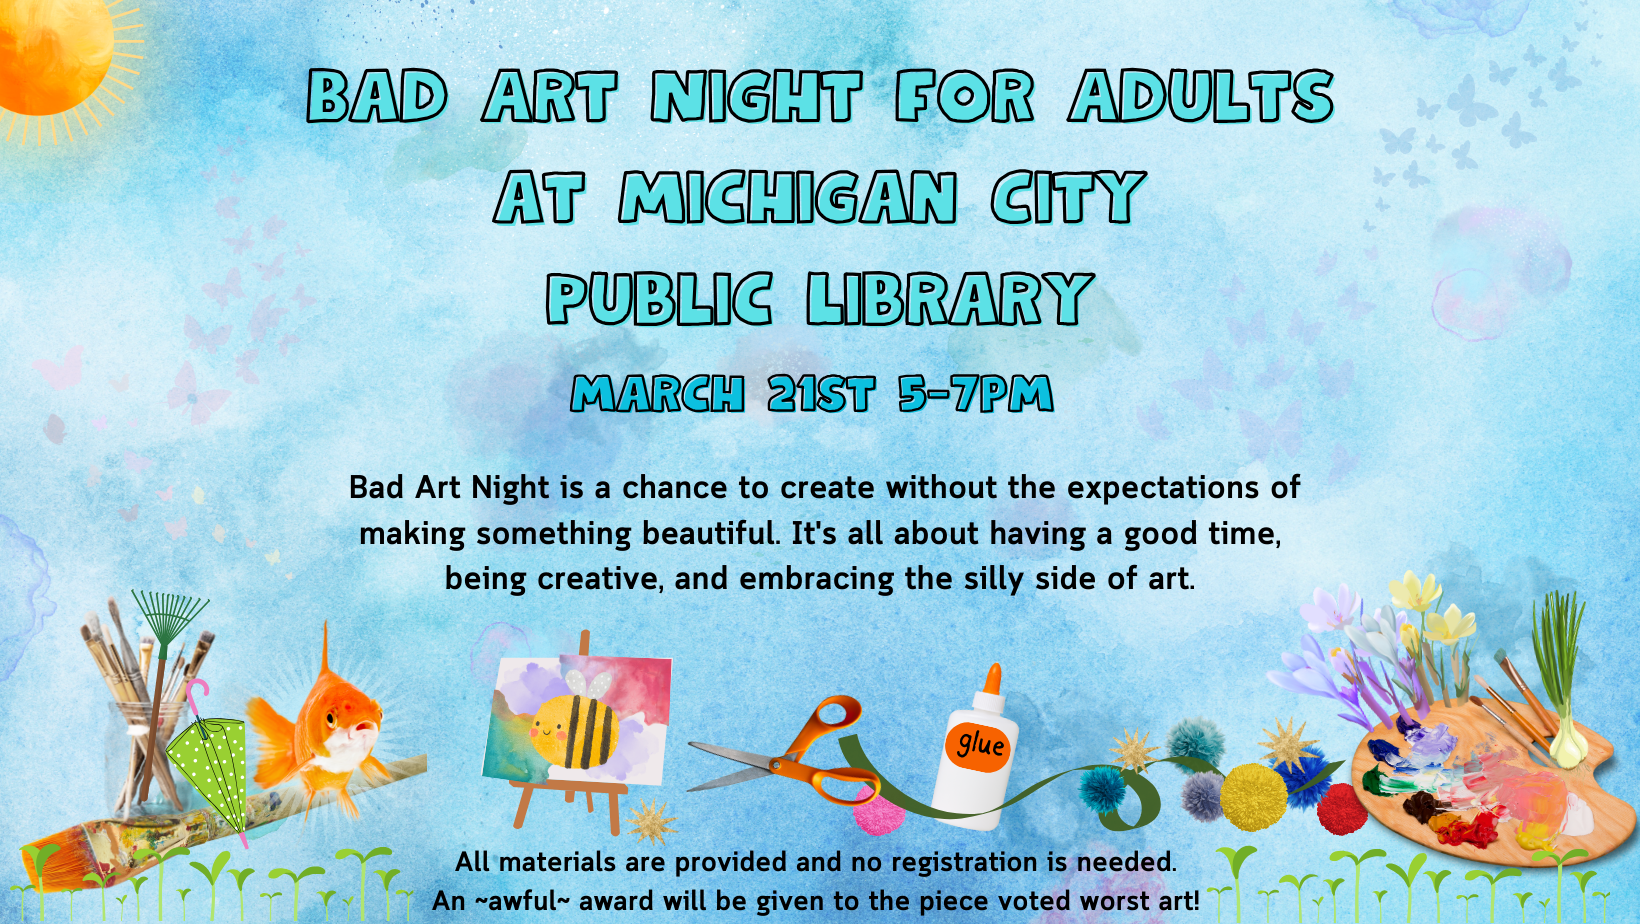 Bad Art Night for Adults, Thursday, march 21 at 5:00 pm